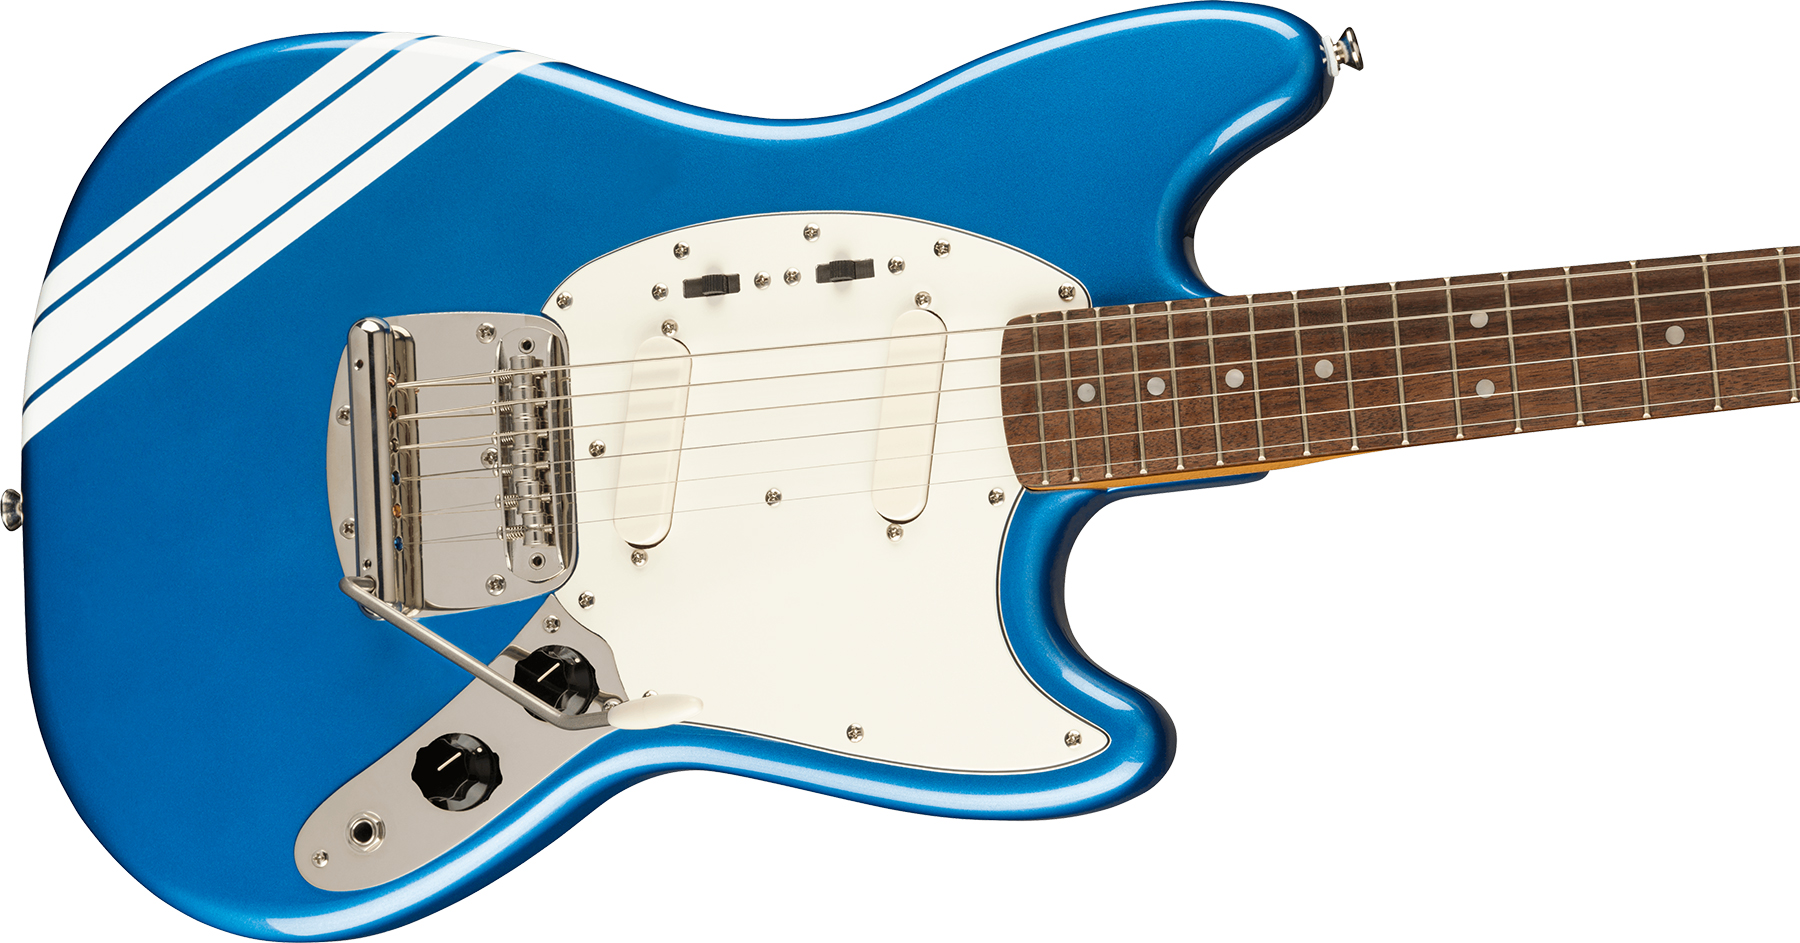 Squier Mustang  Classic Vibe 60s Competition Fsr Ltd Lau - Lake Placid Blue W/ Olympic White Stripes - Guitarra electrica retro rock - Variation 2